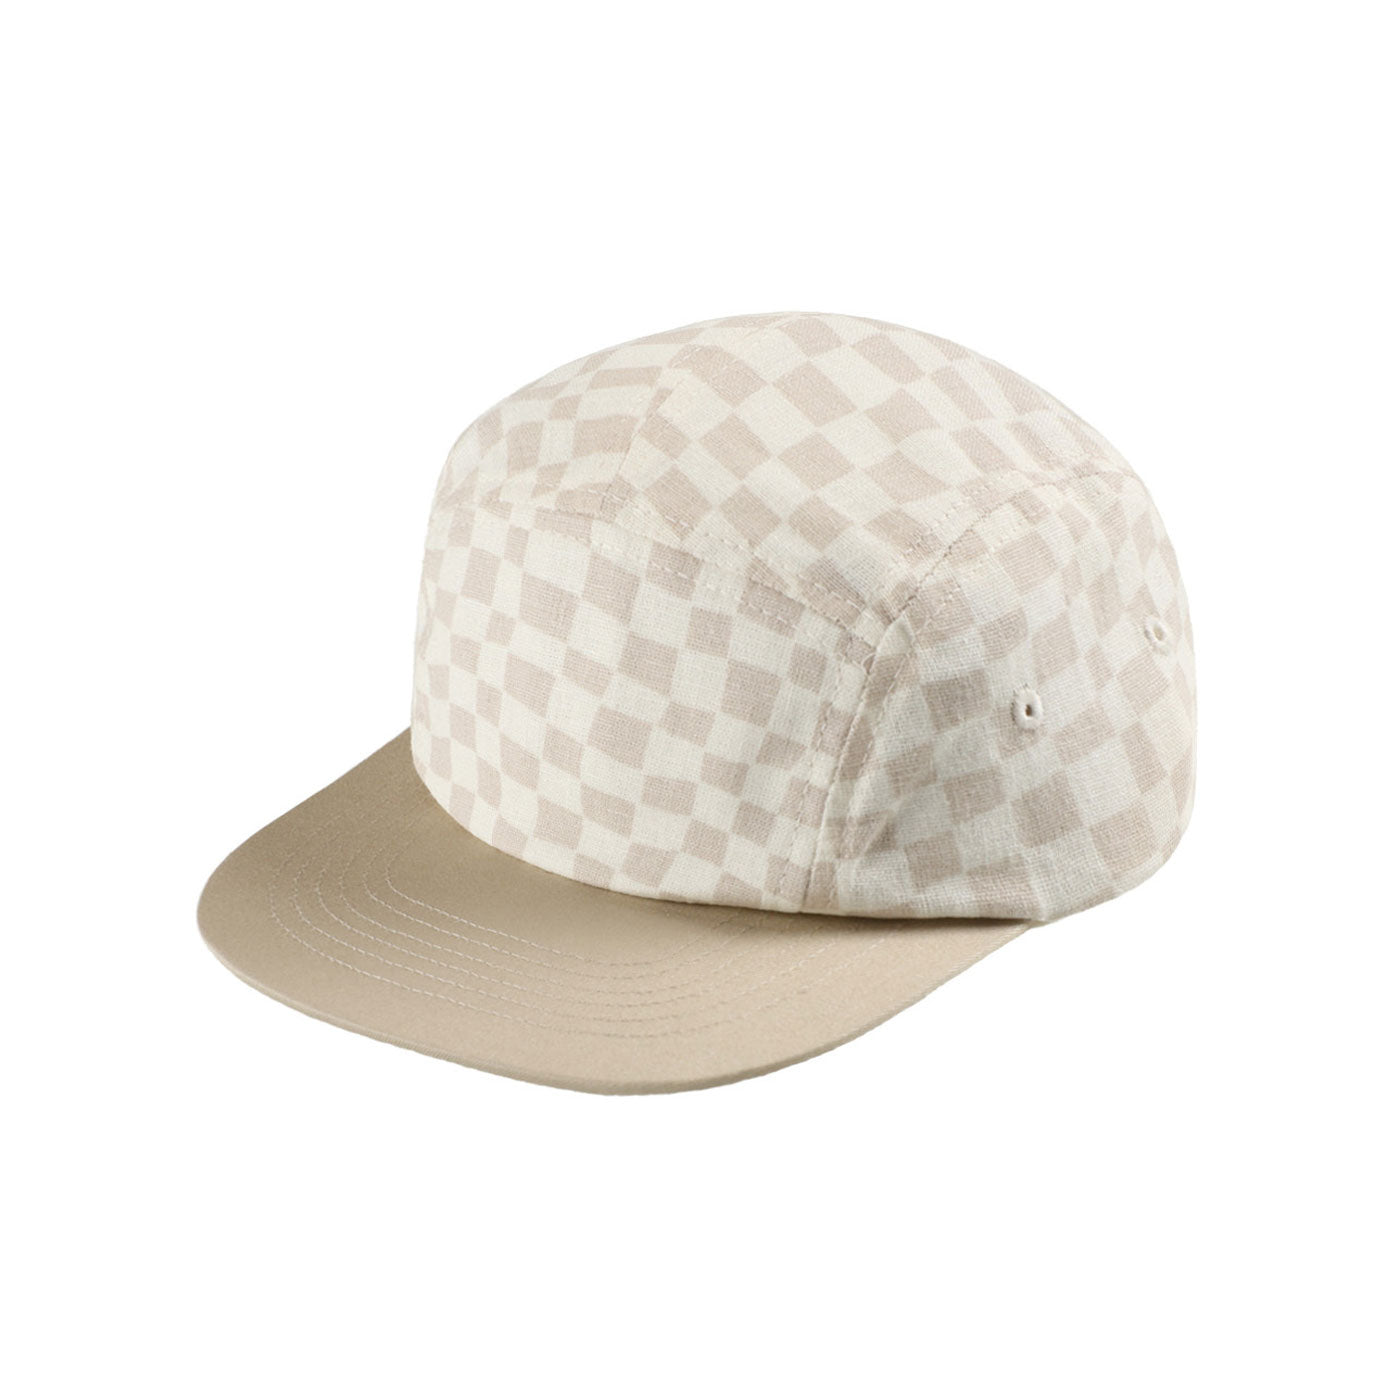 Rylee and Cru Skater Hat - Dove Check